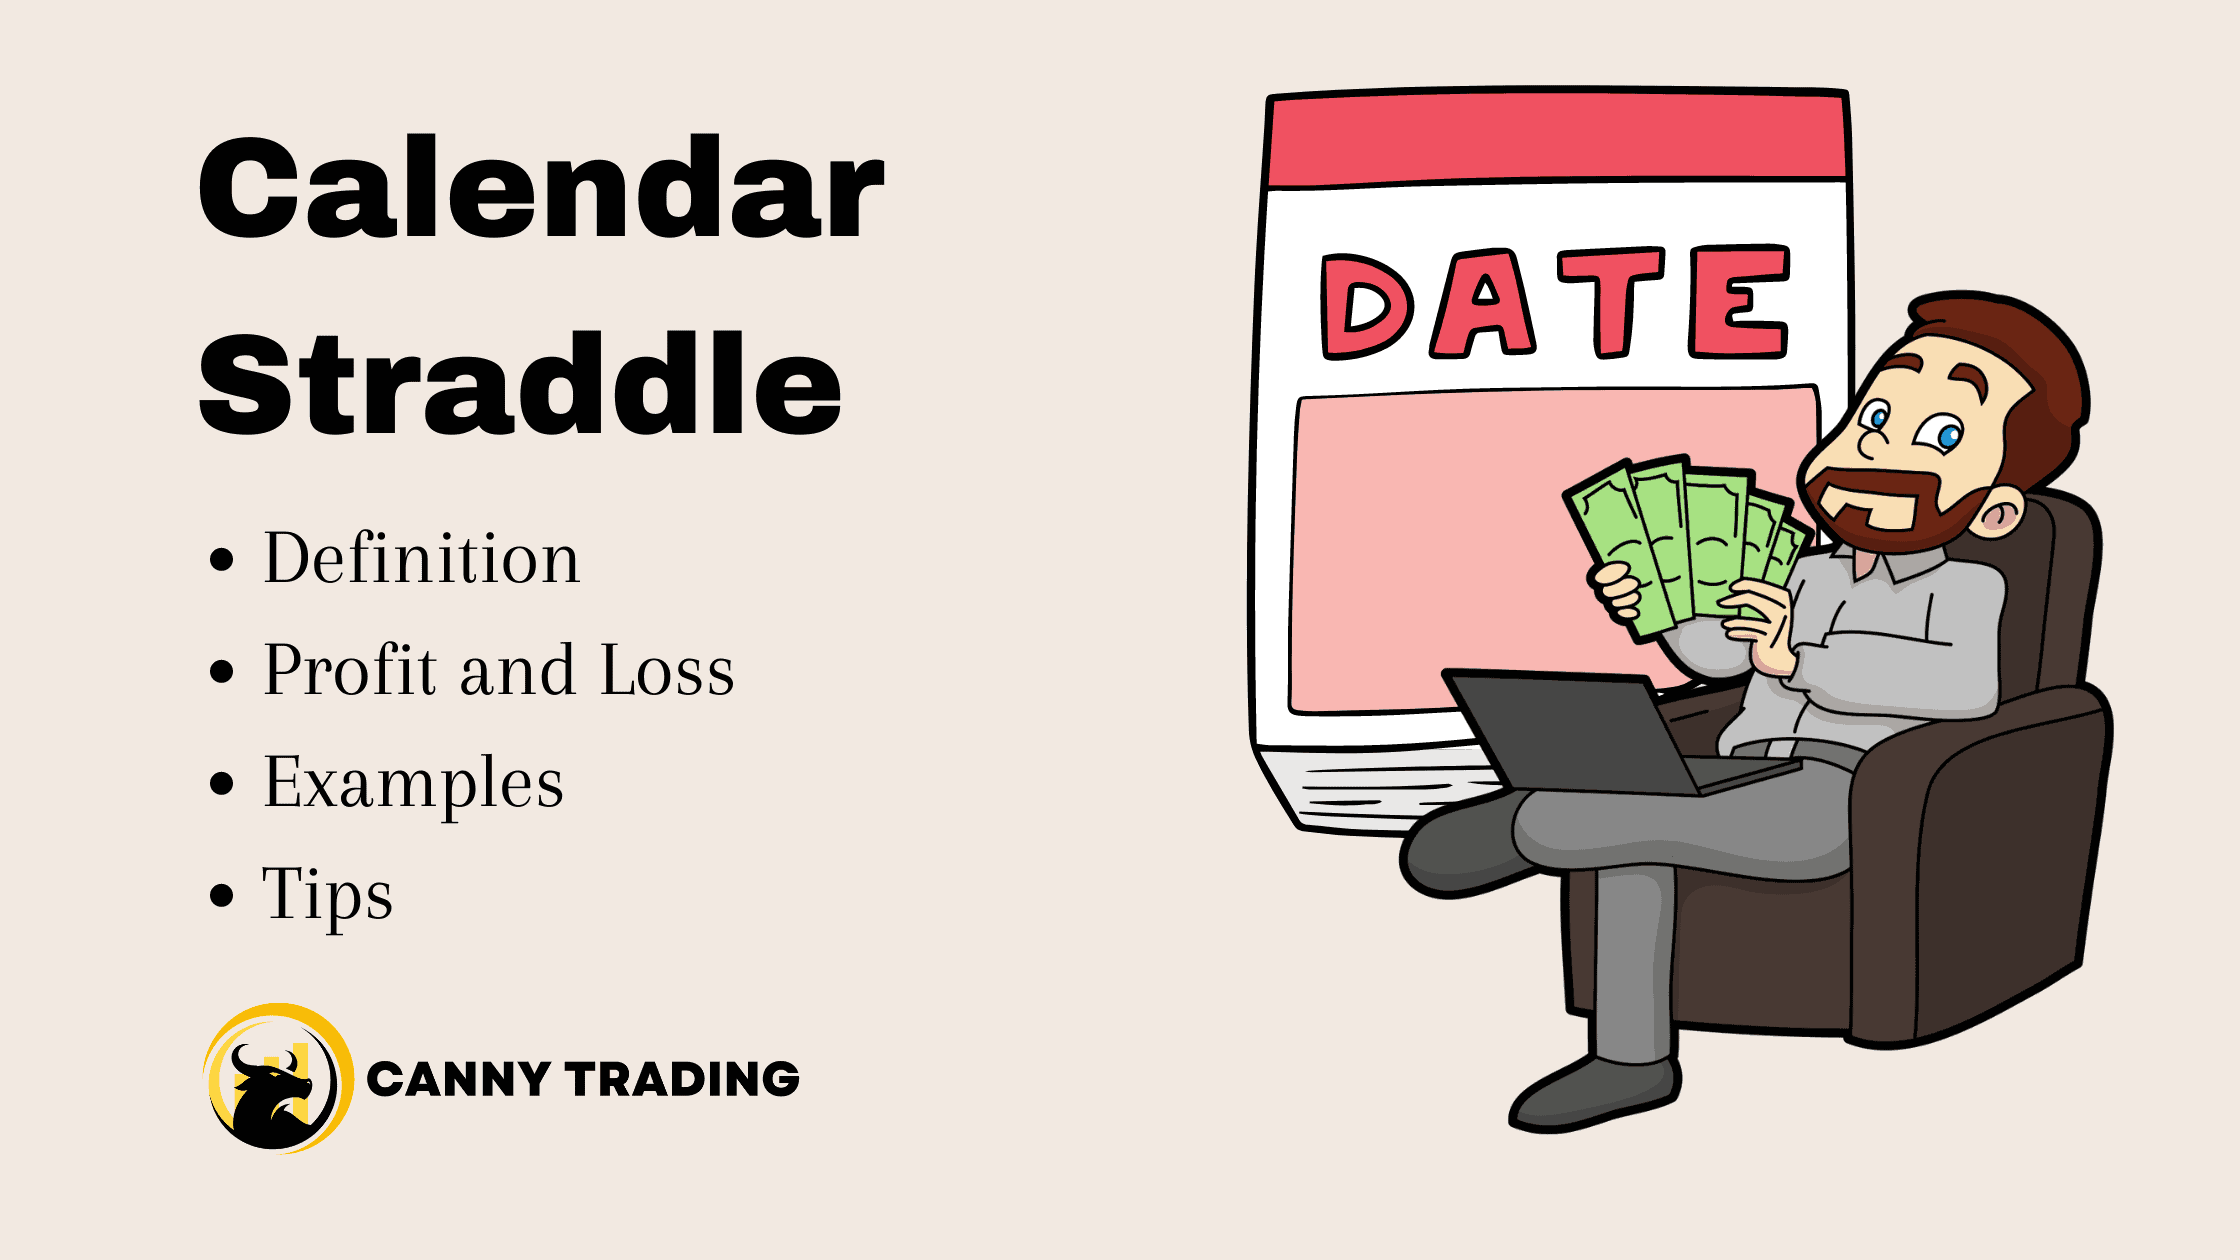 Calendar Straddle_ Definition, Profit and Loss, Examples, and Tips - Featured Image